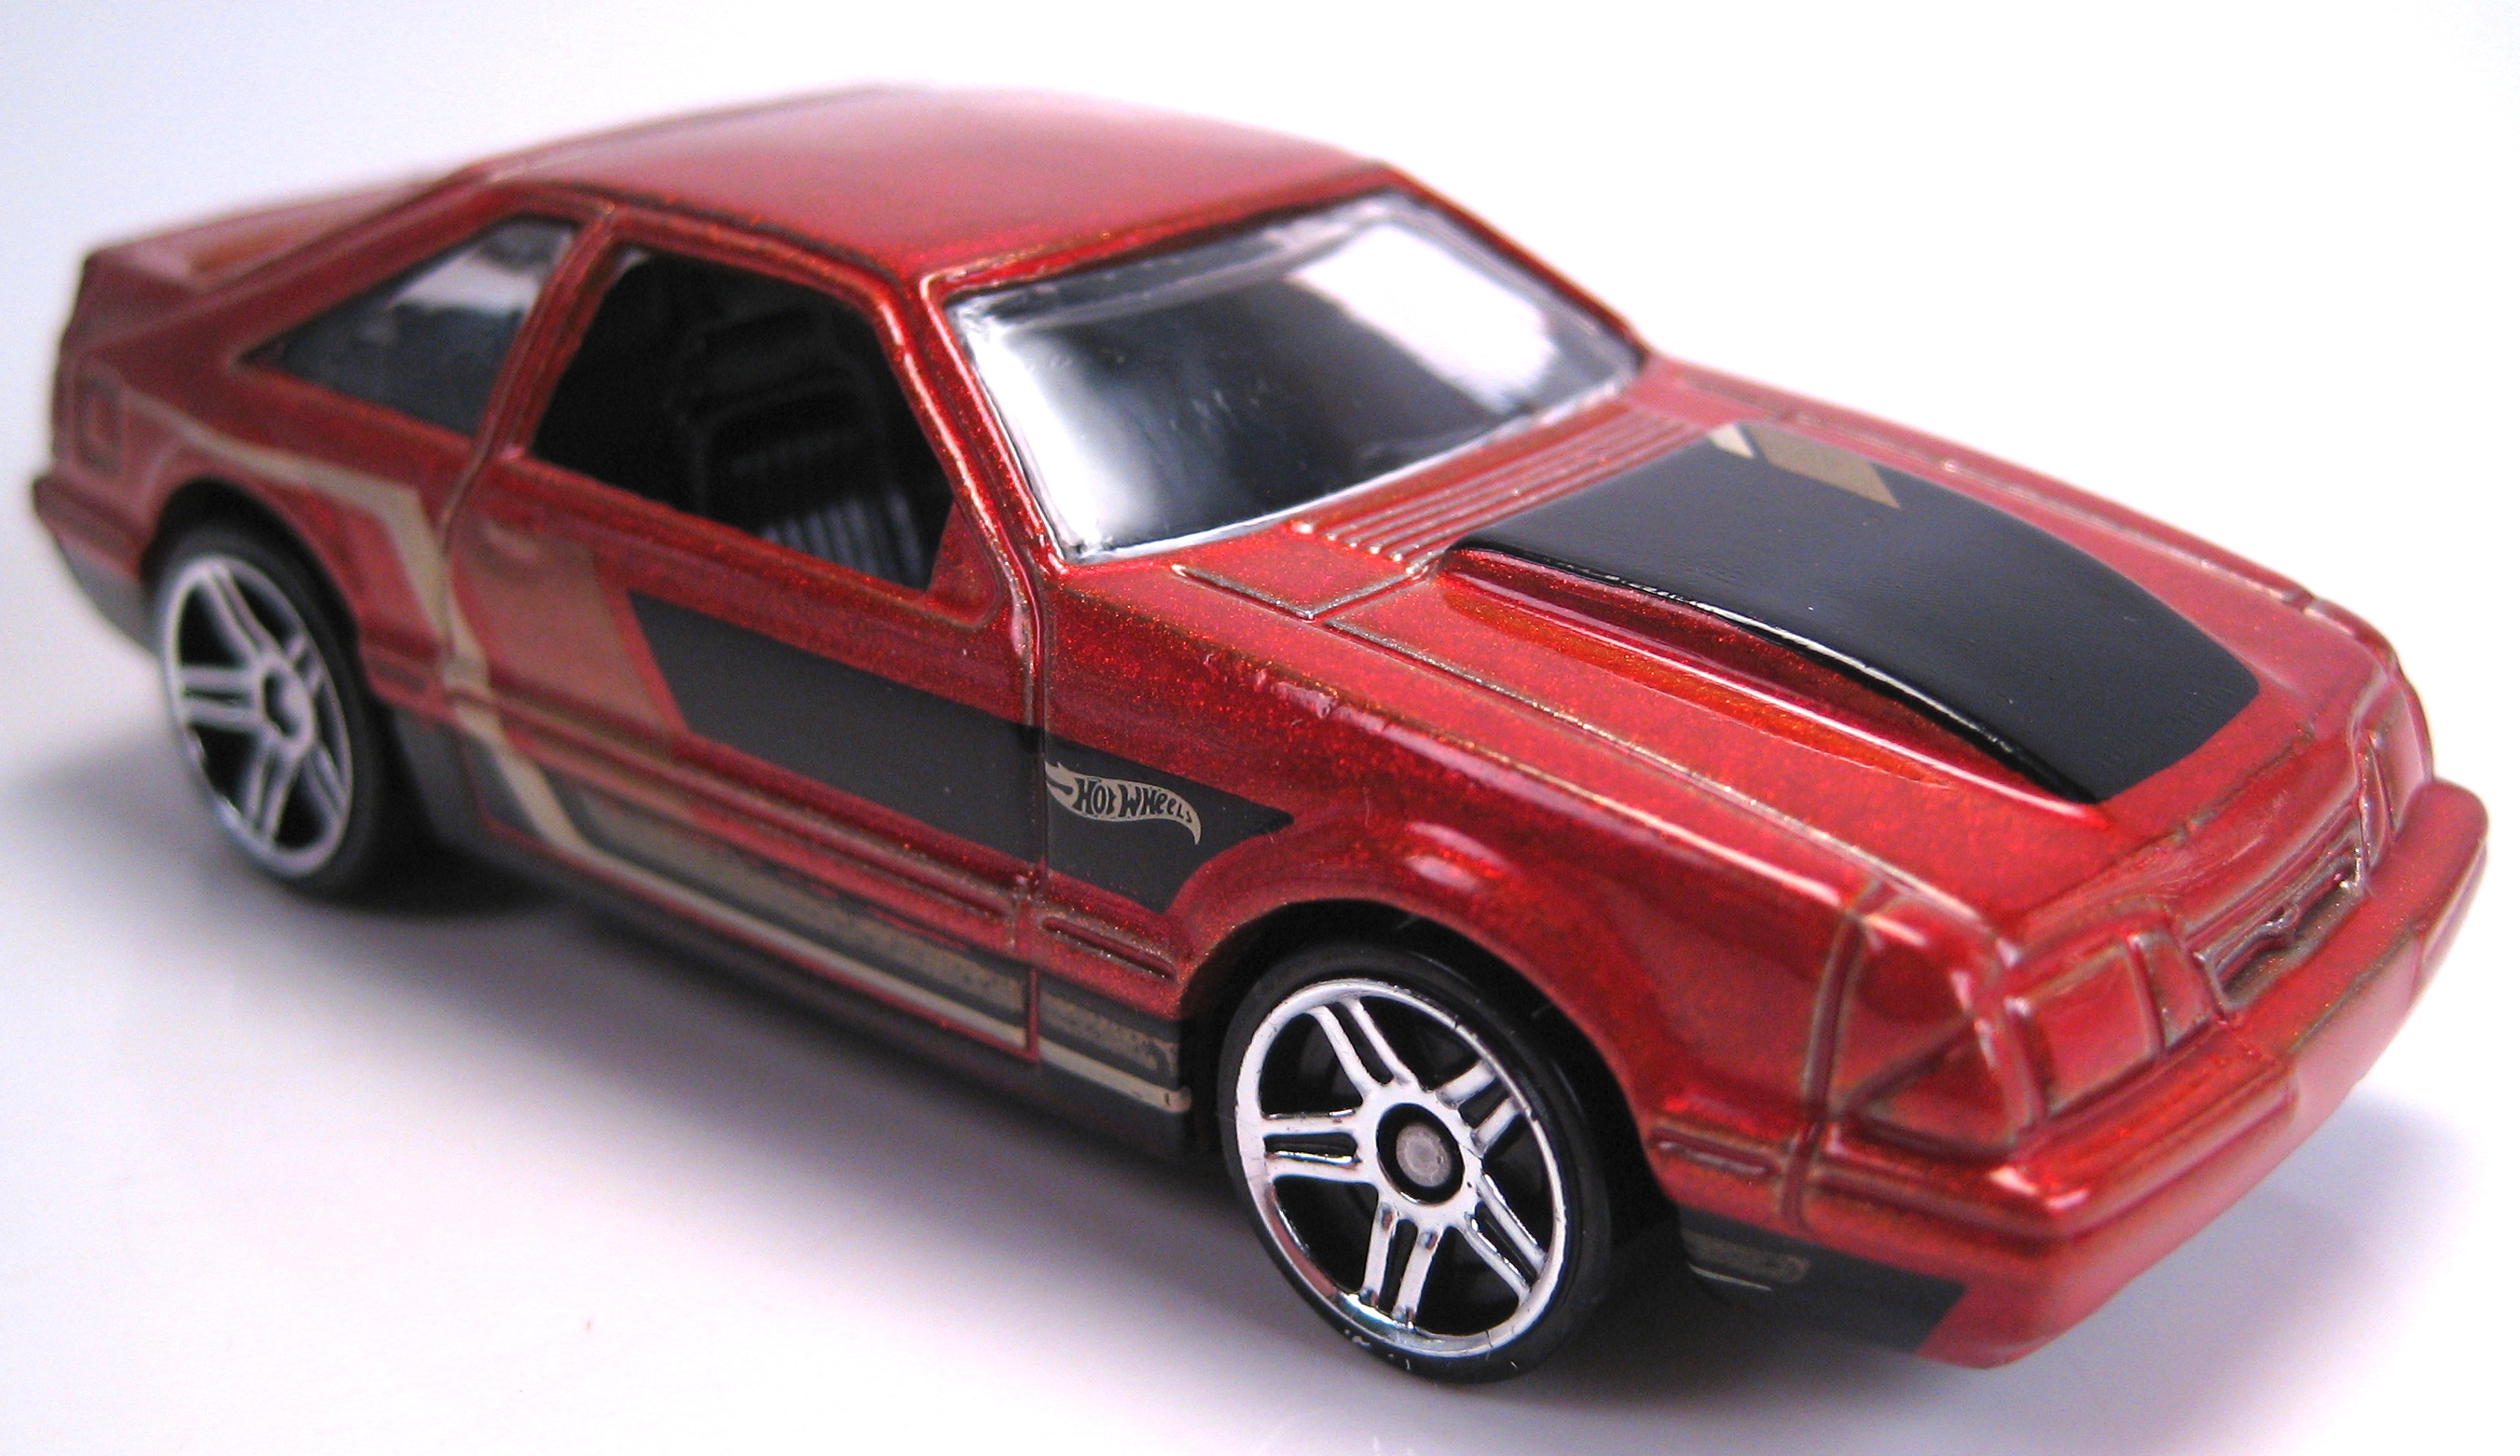 92 Ford Mustang Hot Wheels Wiki.